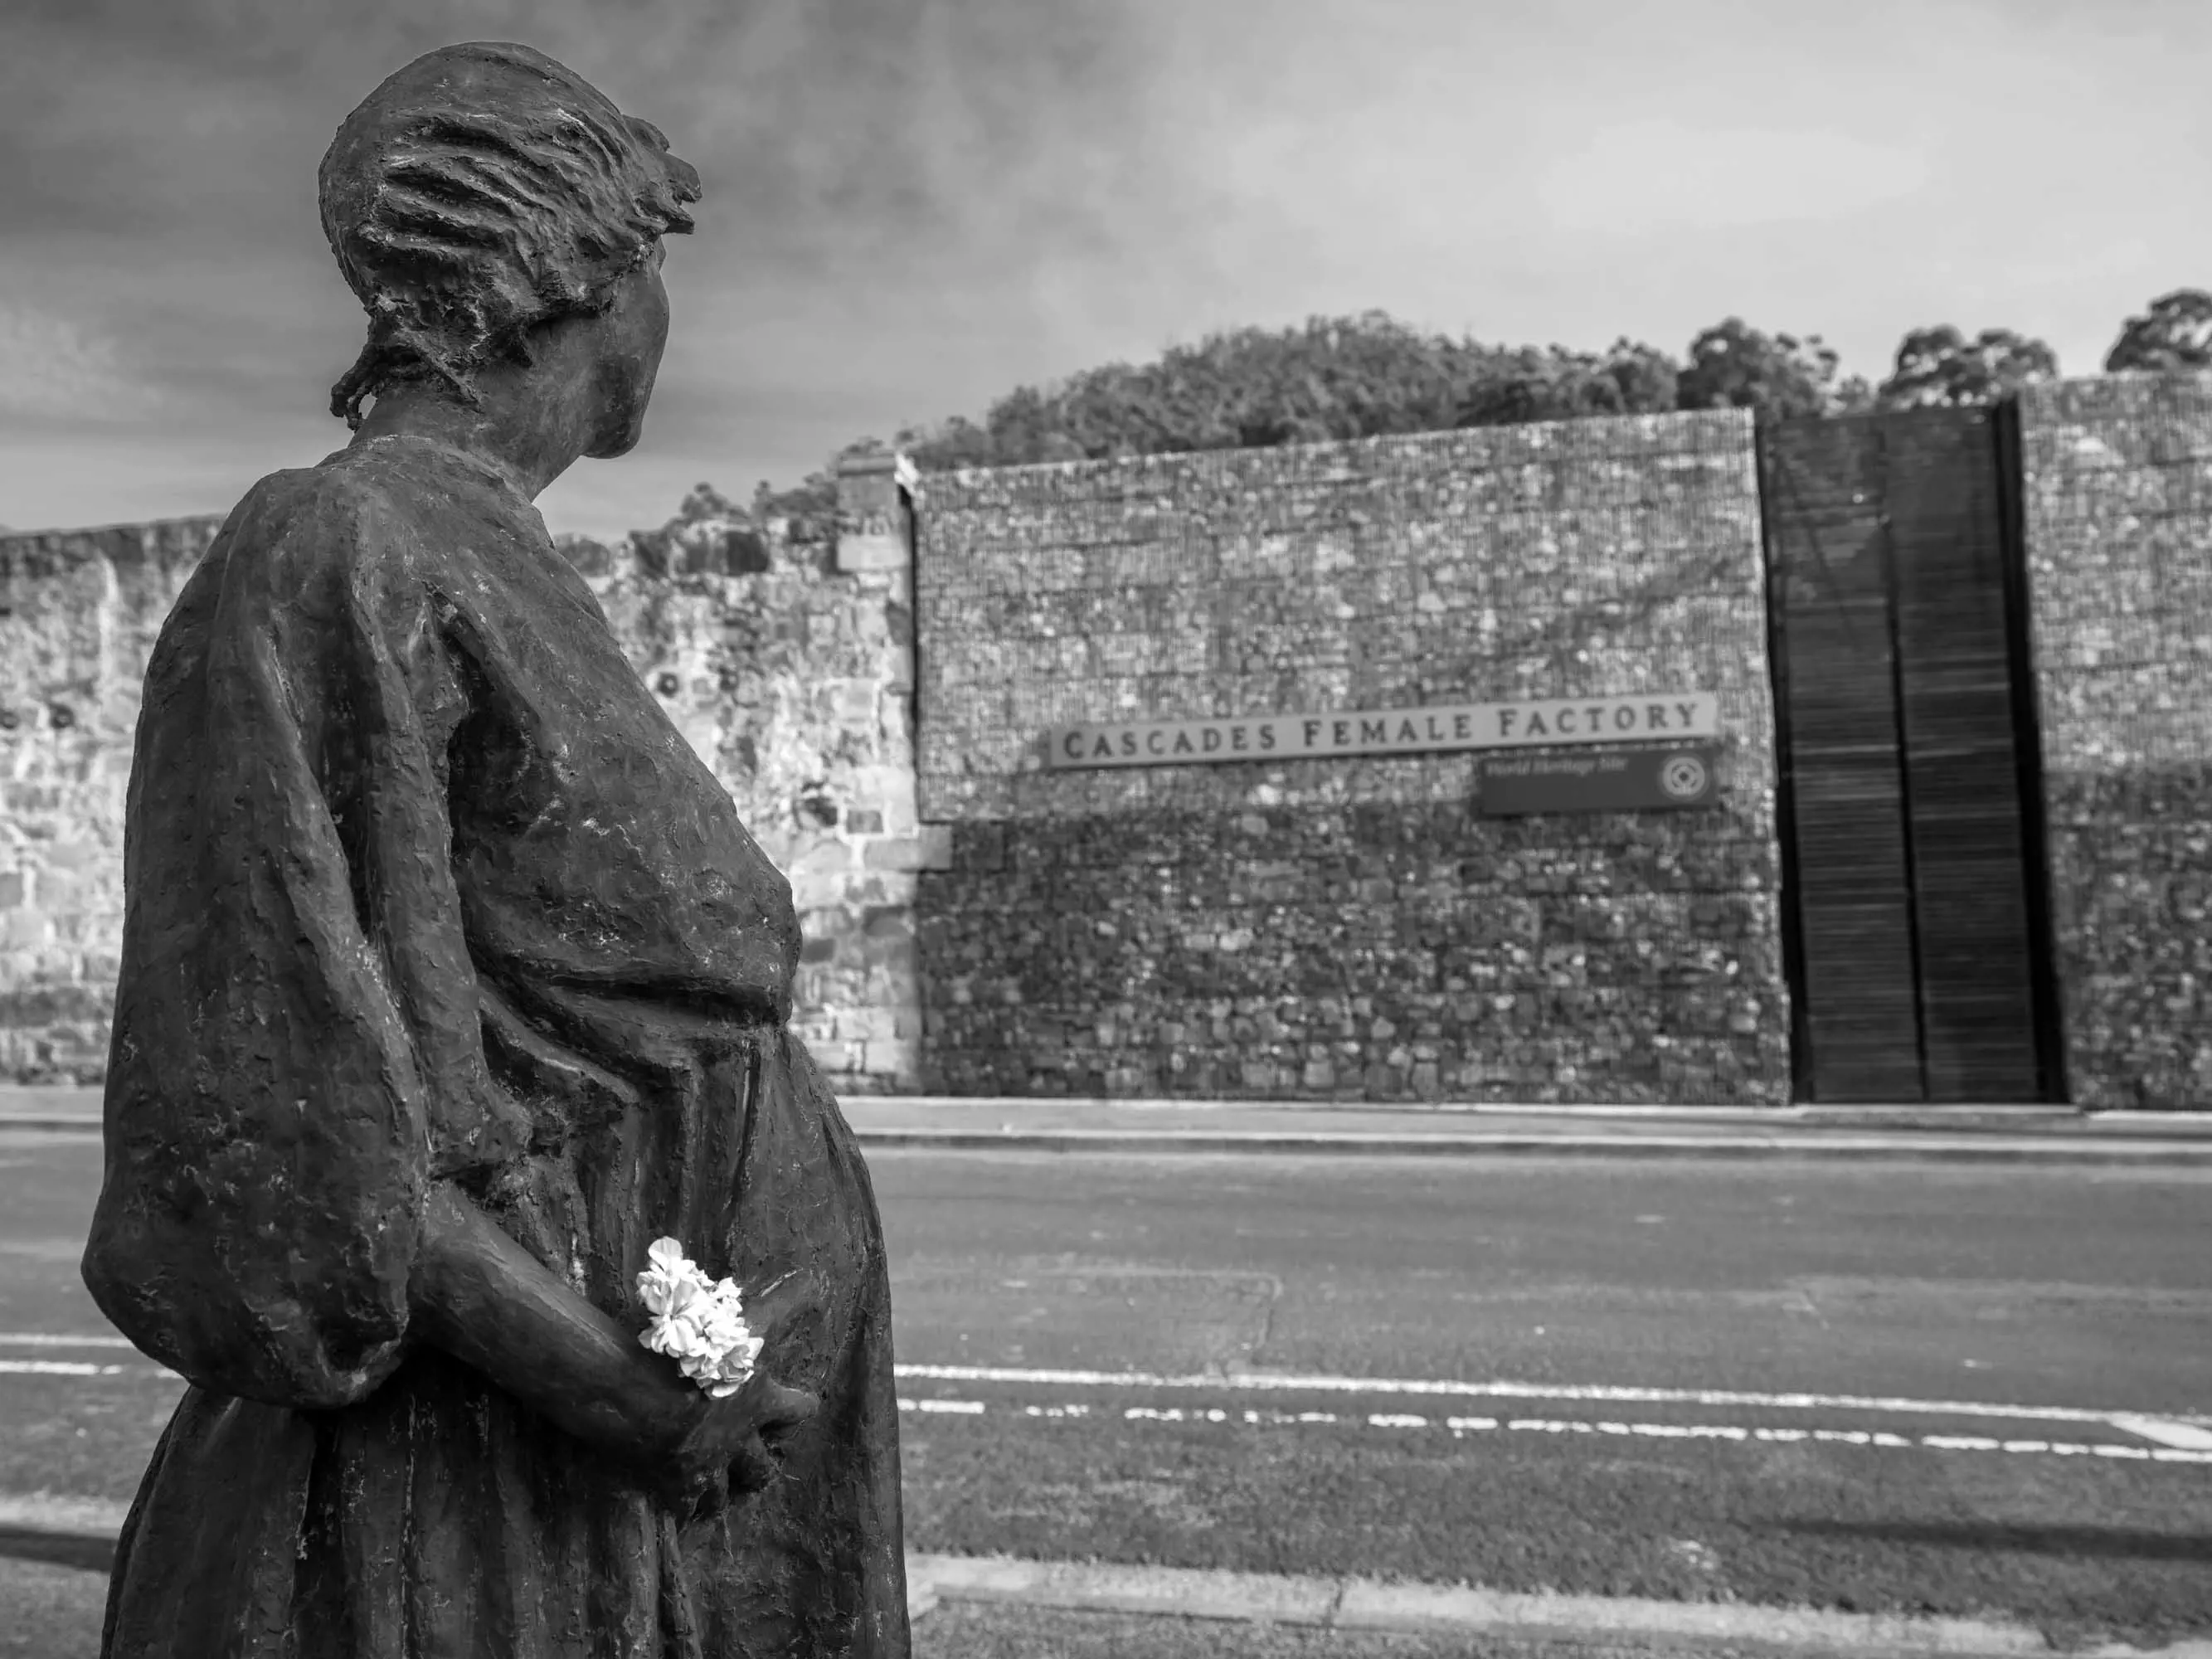 A bronze statue of a woman in early 19th century clothing stands on the side of a road opposite the large stone wall entrance to a historic site.